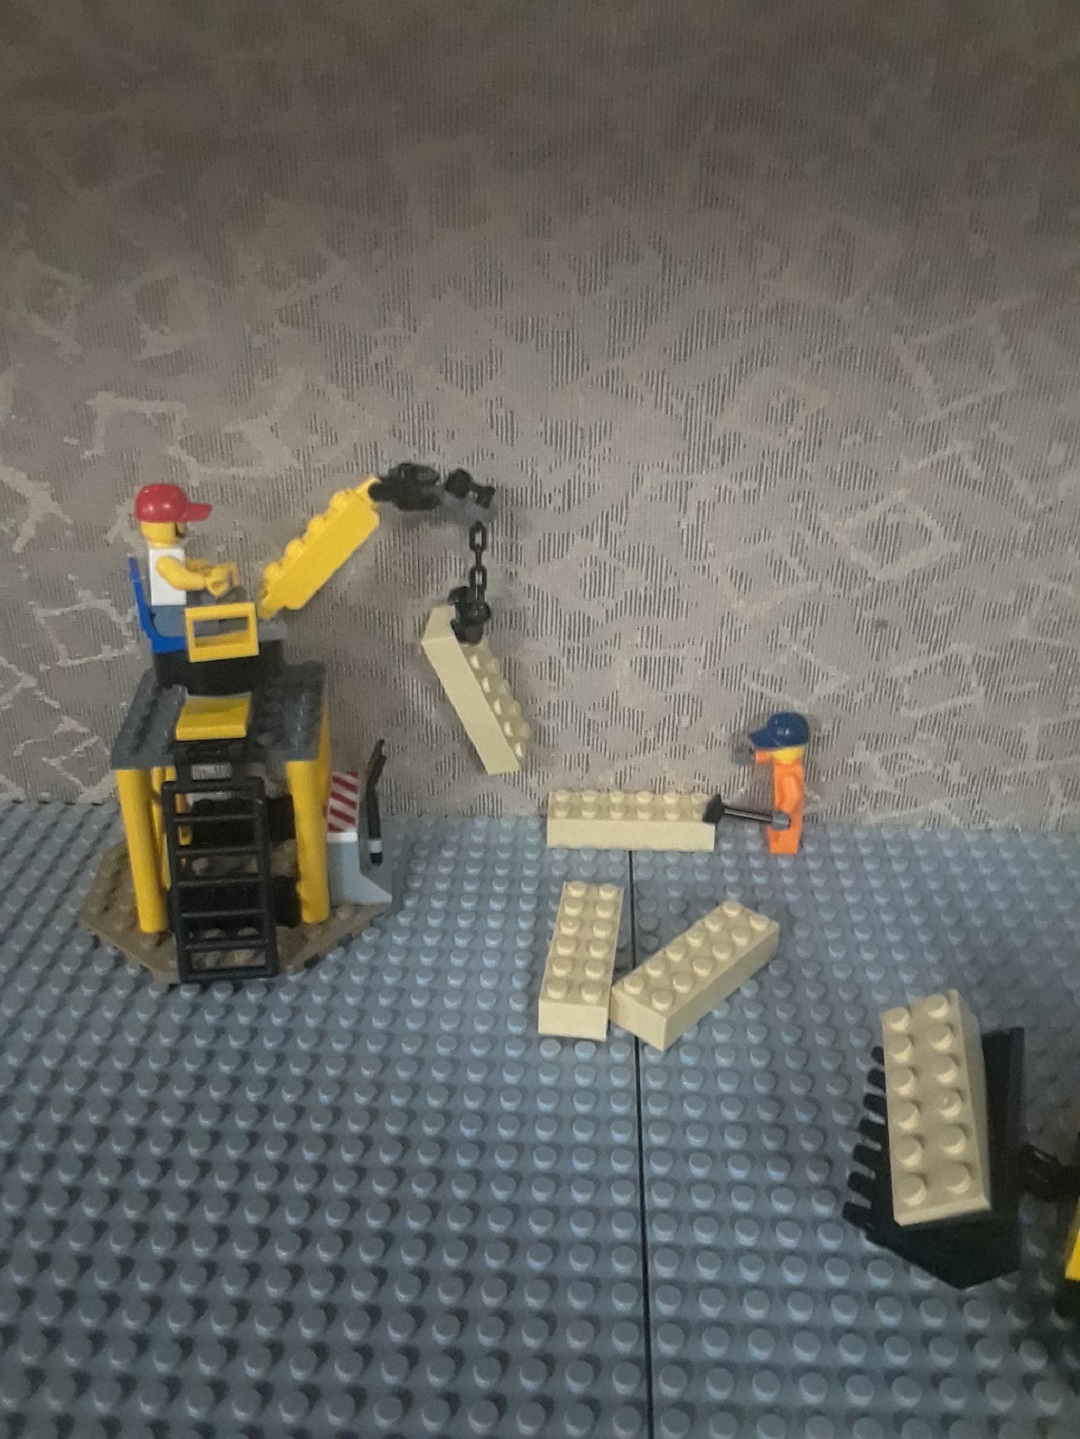 Two Construction Workers Onsite at Lego Simpson Strong-Tie